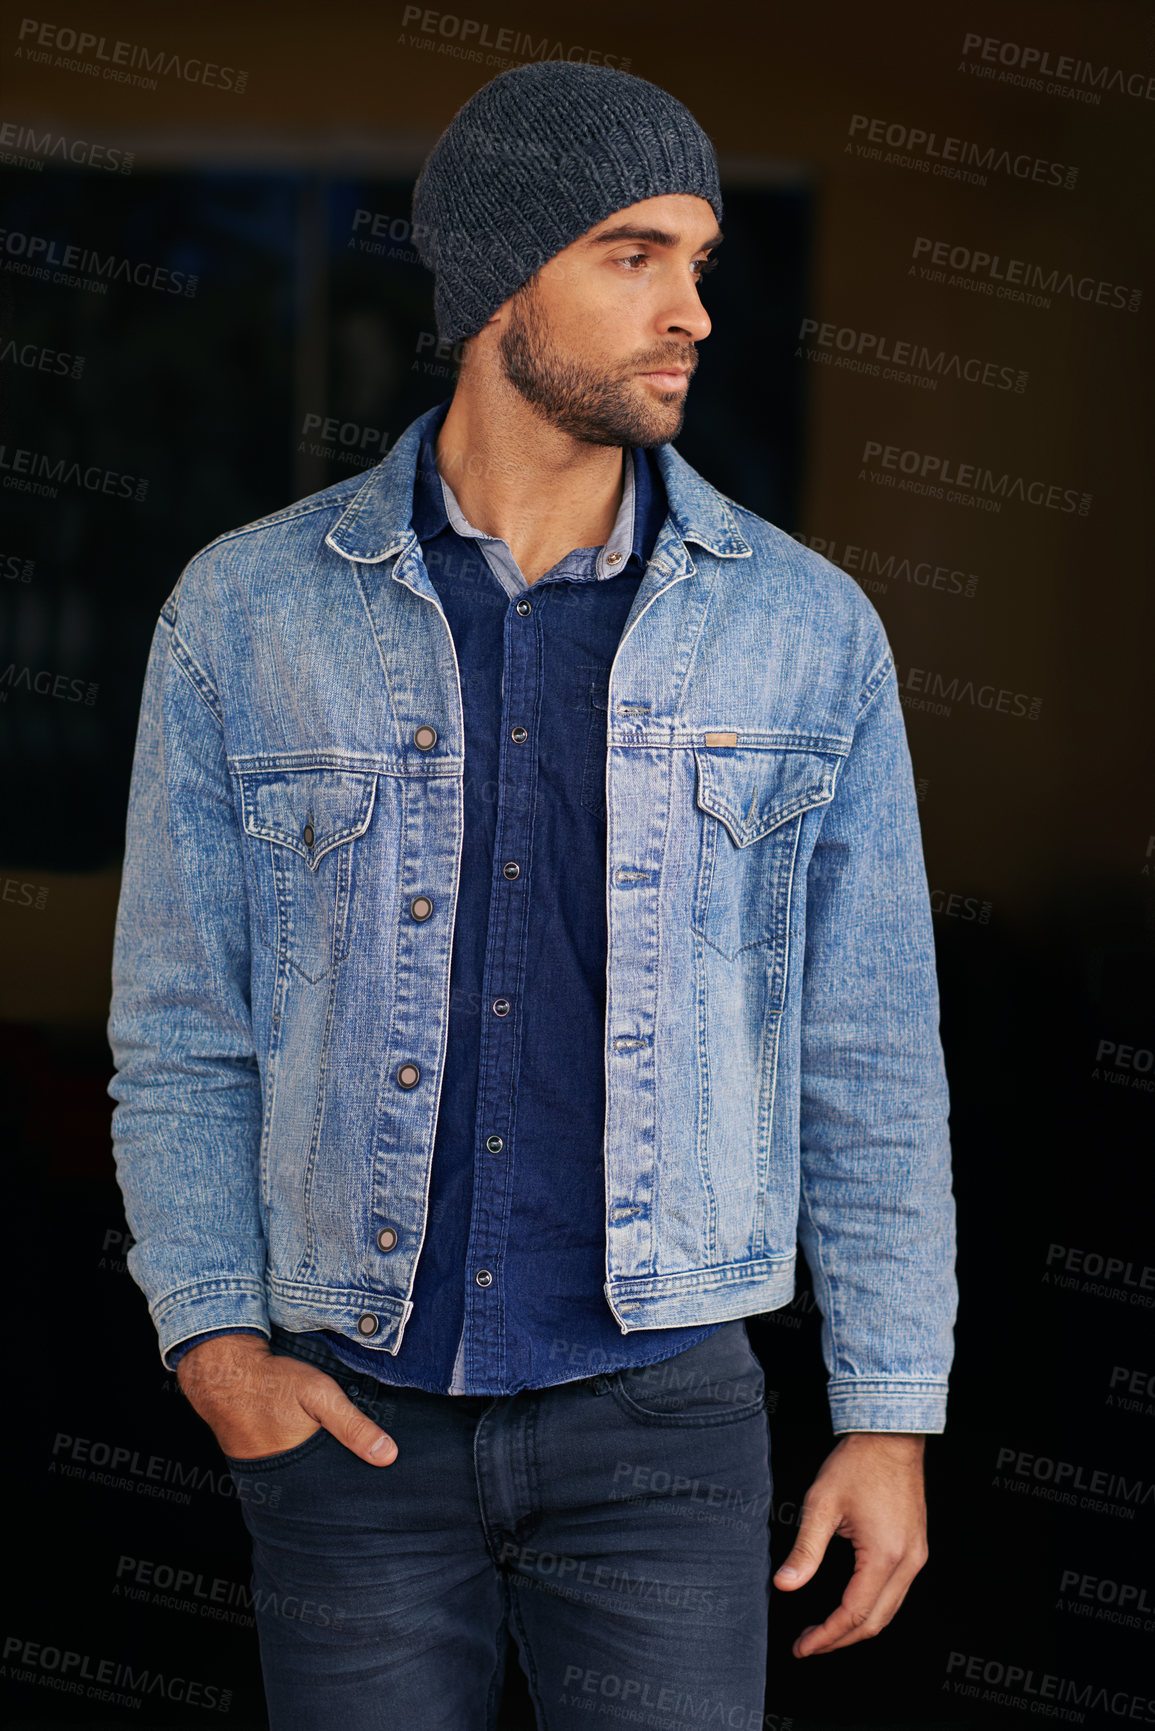 Buy stock photo Cropped shot of a fashionable young man dressed in denim clothing